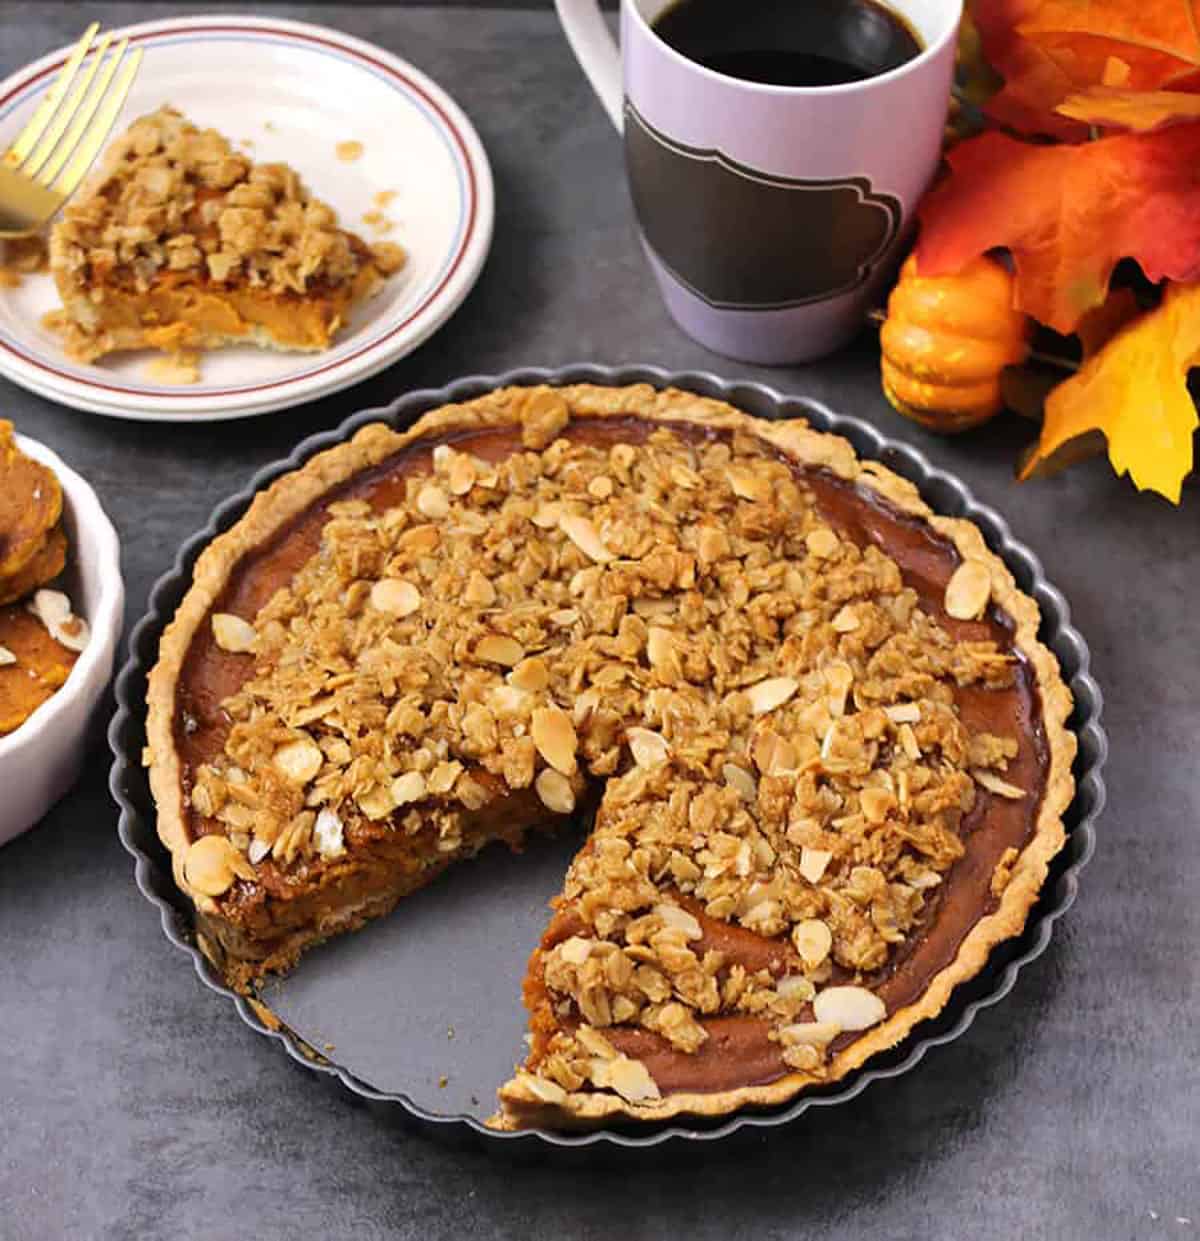 pumpkin pie with streusel topping. with a slice served in a plate along with black coffee.